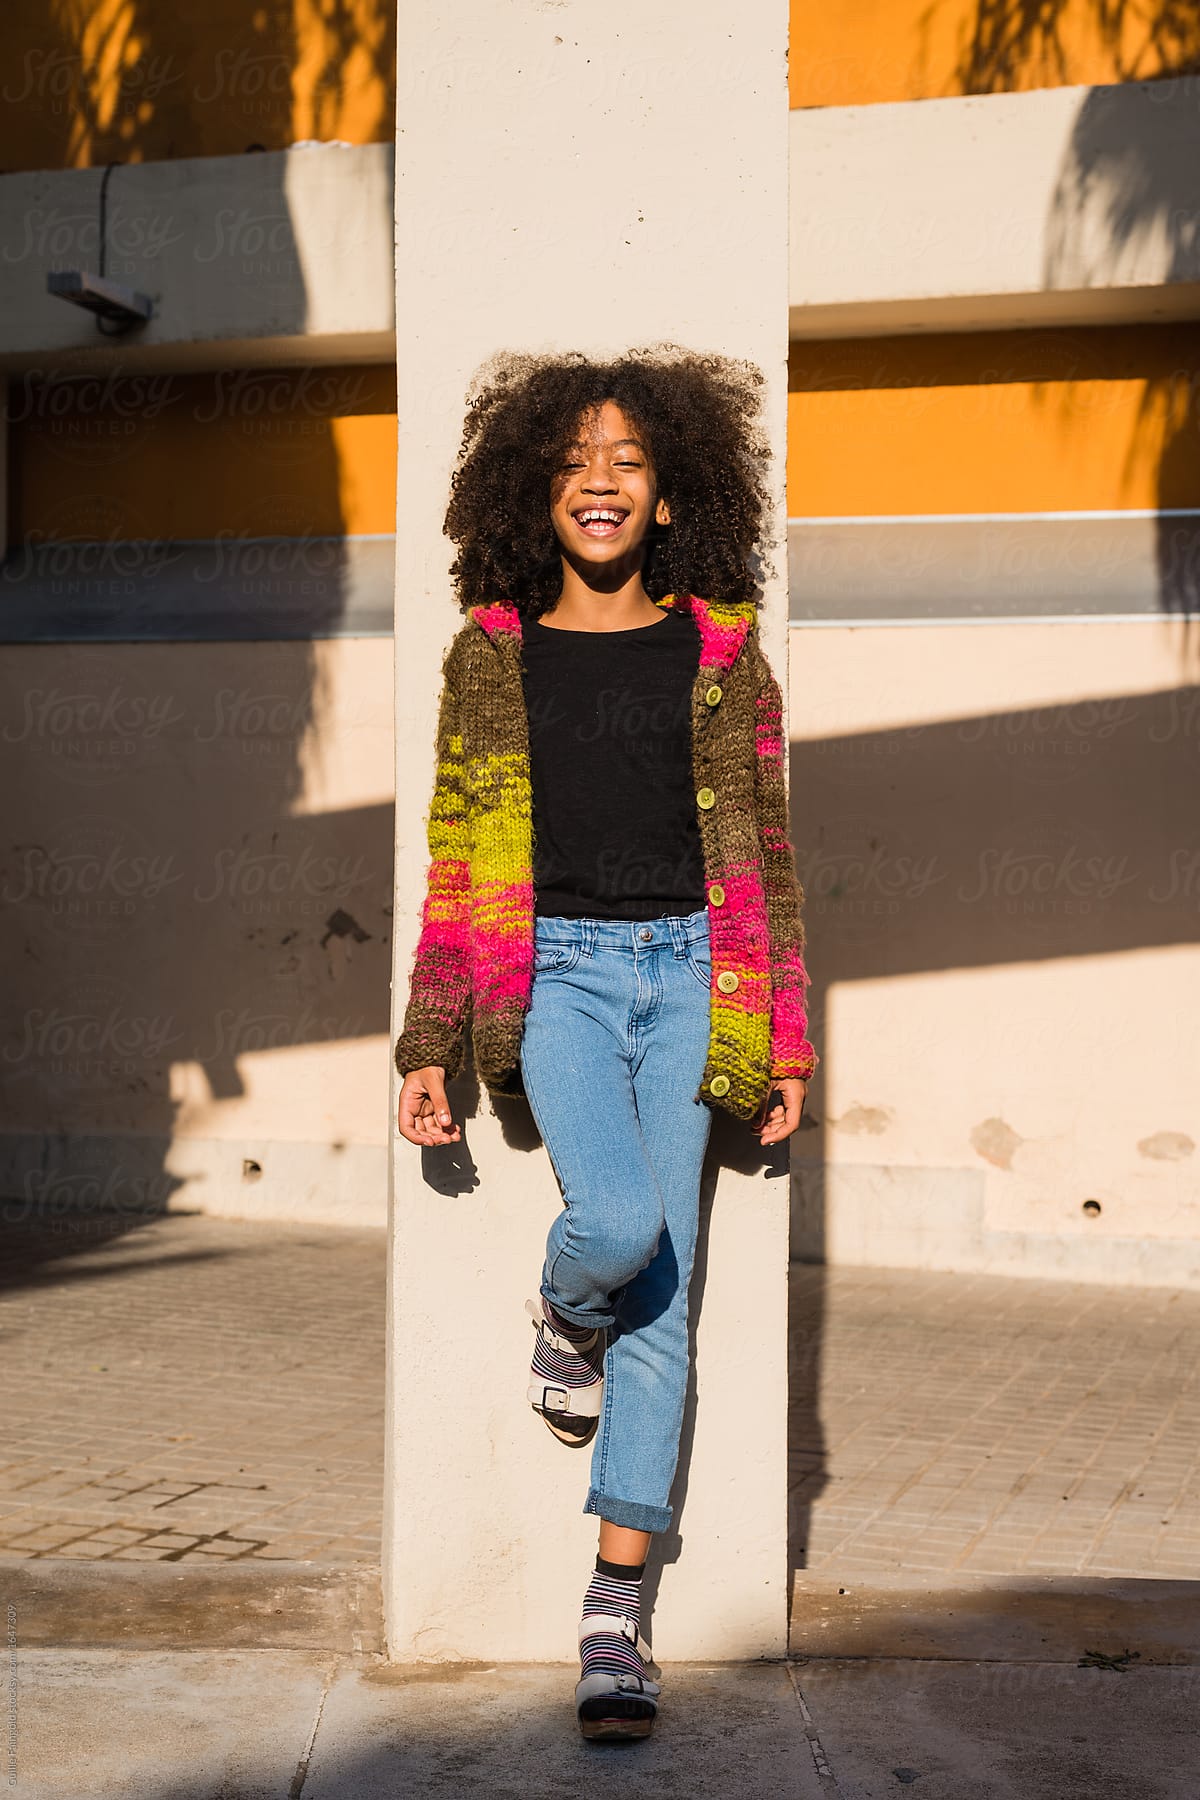 Cheerful Girl At Column By Stocksy Contributor Guille Faingold Stocksy